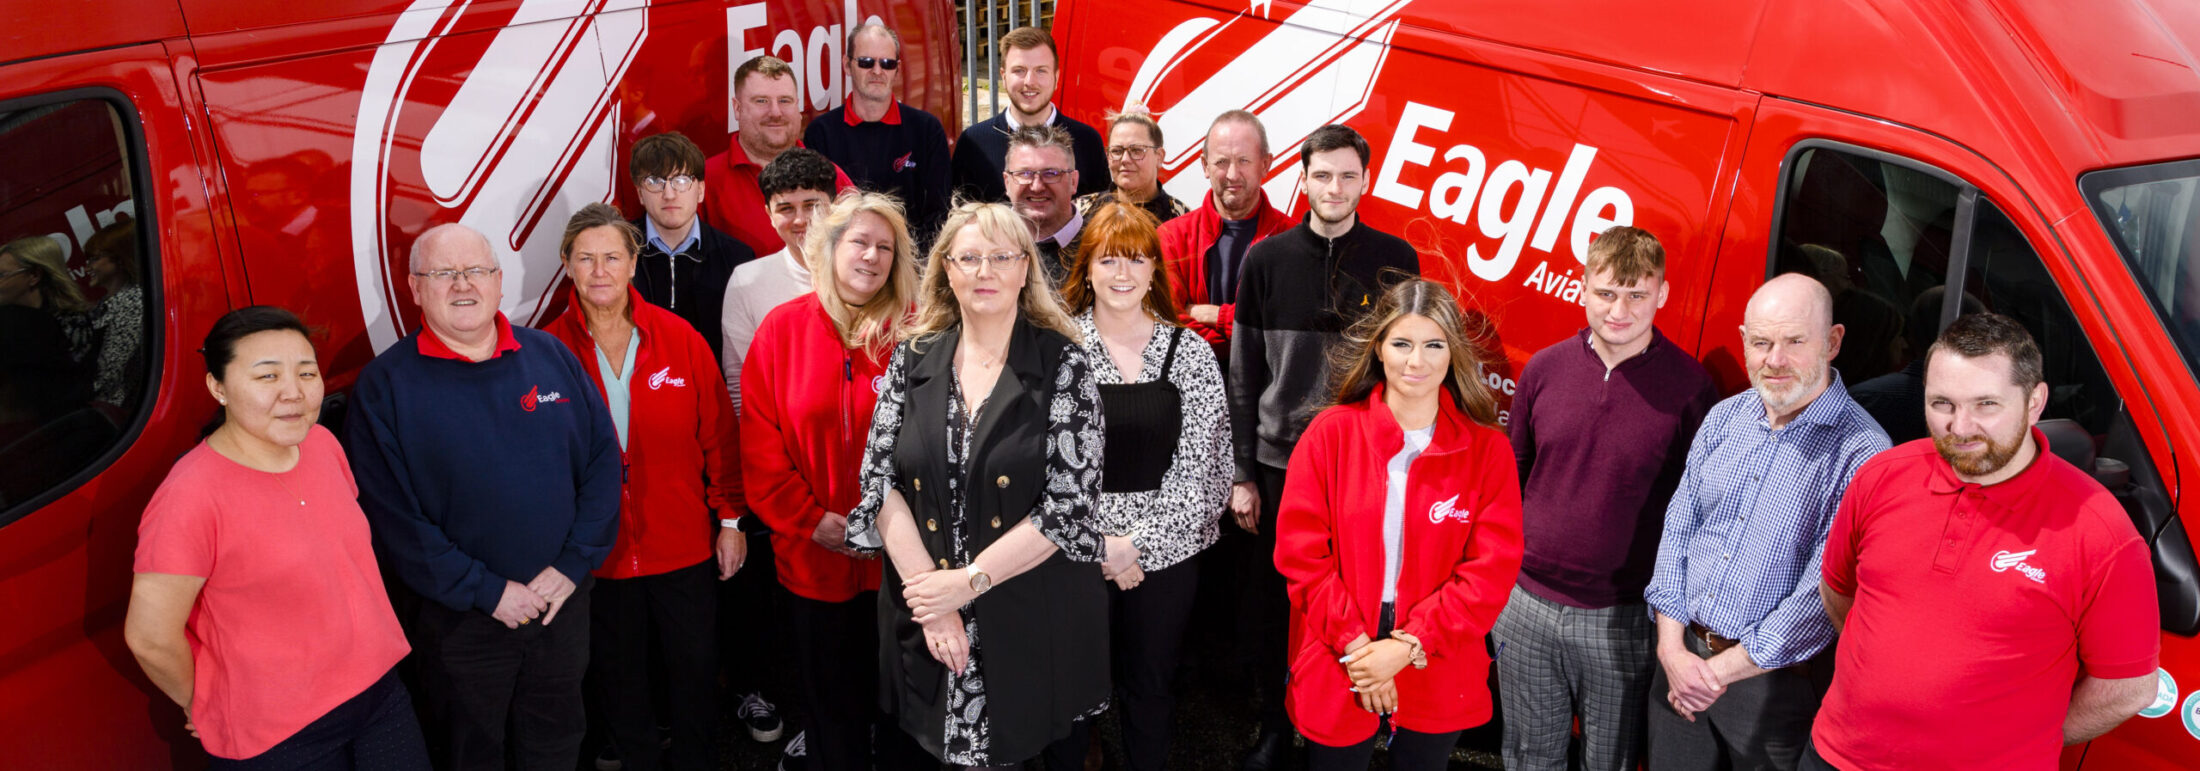 The team at Scotland's independent courier company, Eagle Couriers